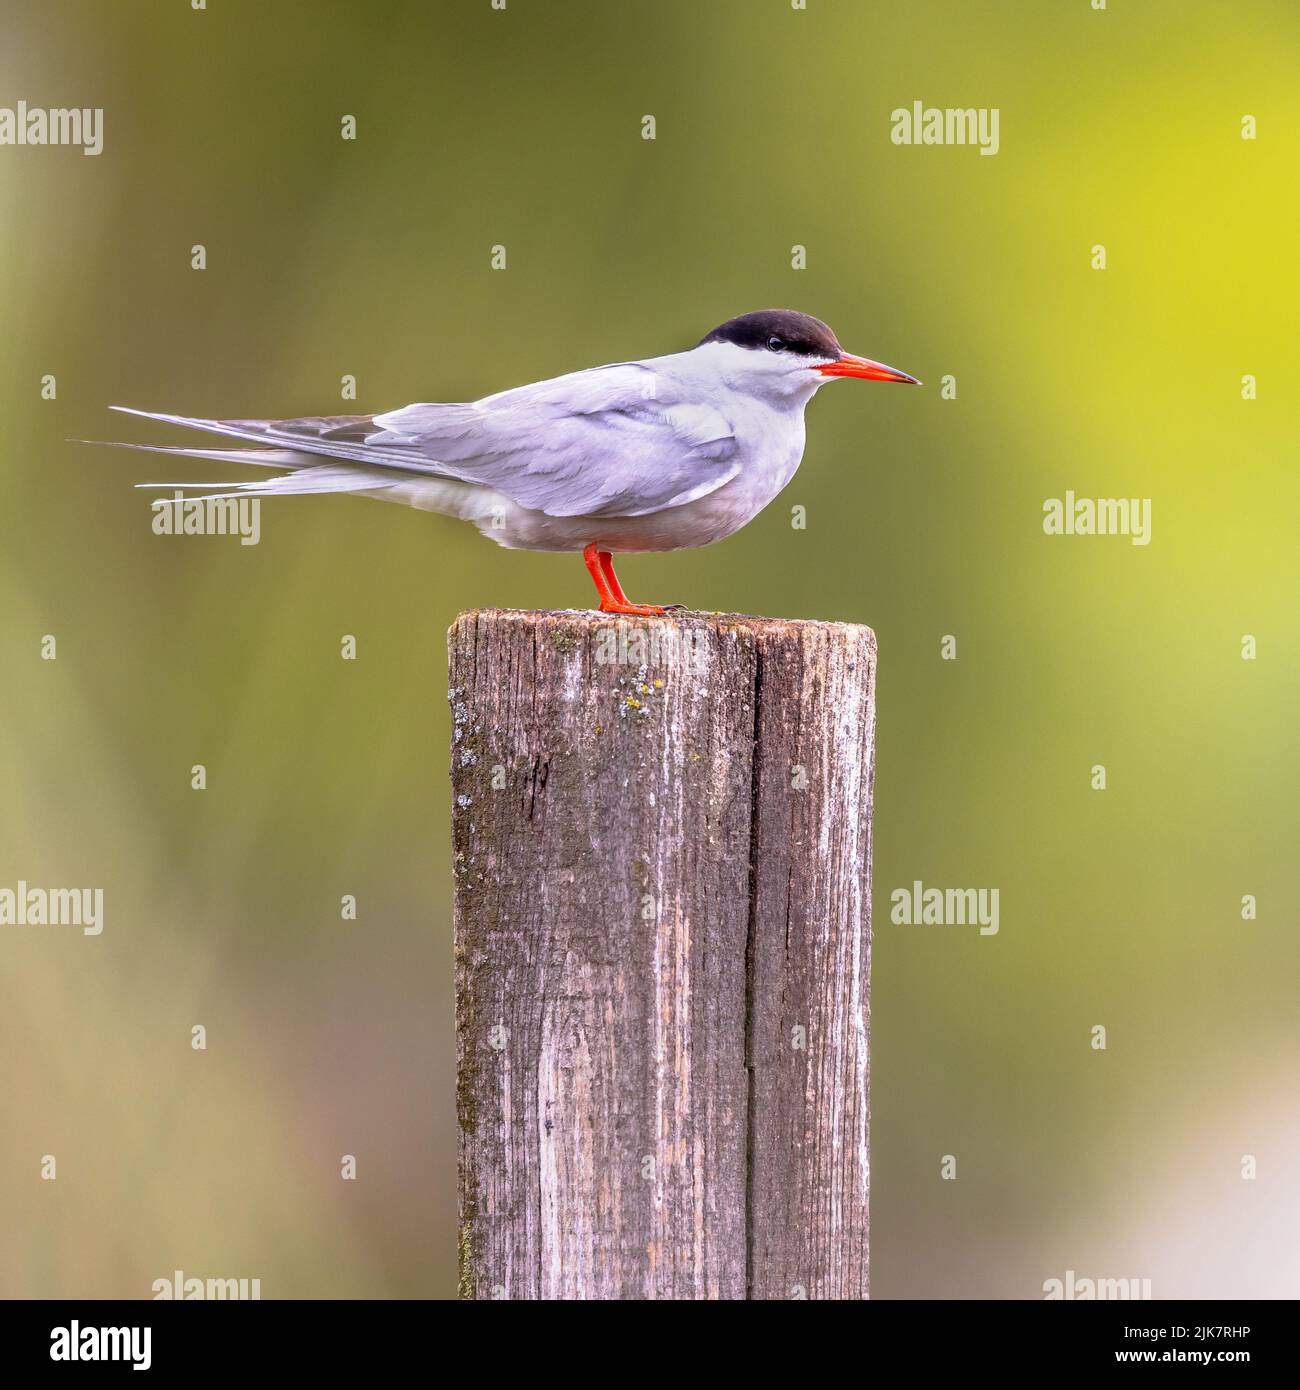 Common Tern (Sterna hirundo) perched on pole in rainy conditions. This is a seabird in the family Laridae. Wildlife Scene of Nature in Europe. Stock Photo